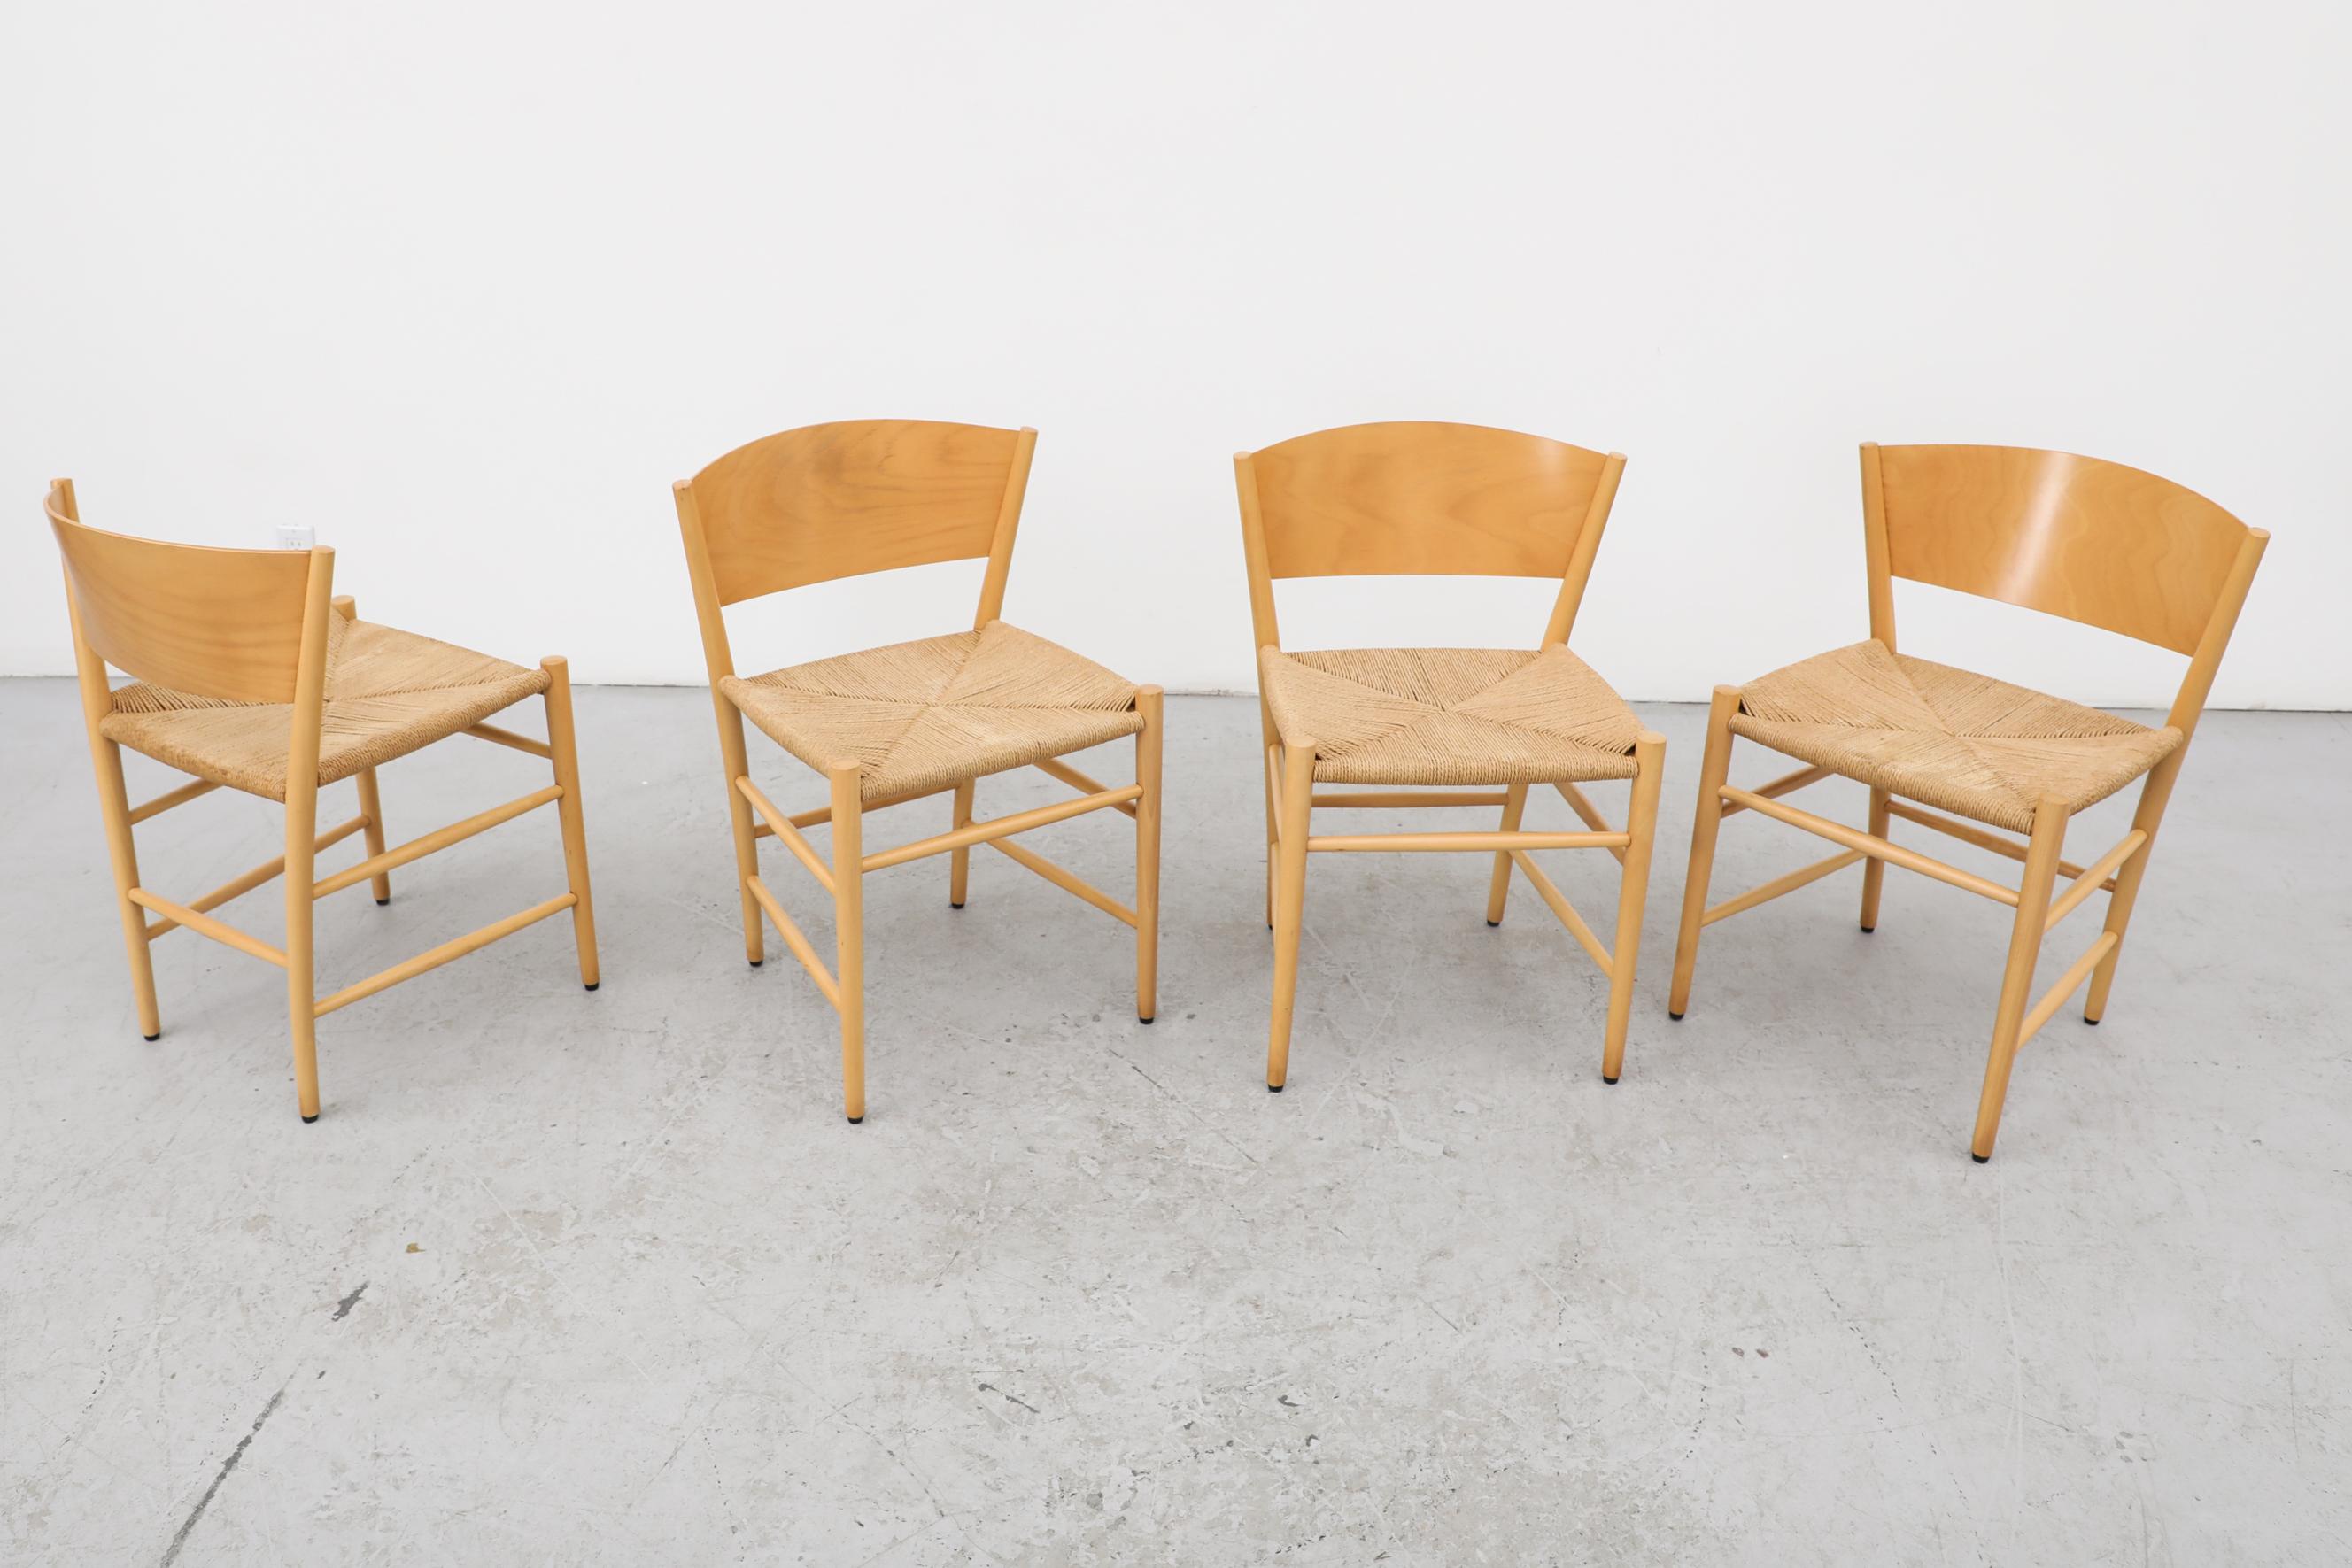 Late 20th Century Set of 4 1990s Danish 'Jive' Chairs by Tom Stepp in Birch for Kvist Møbler For Sale